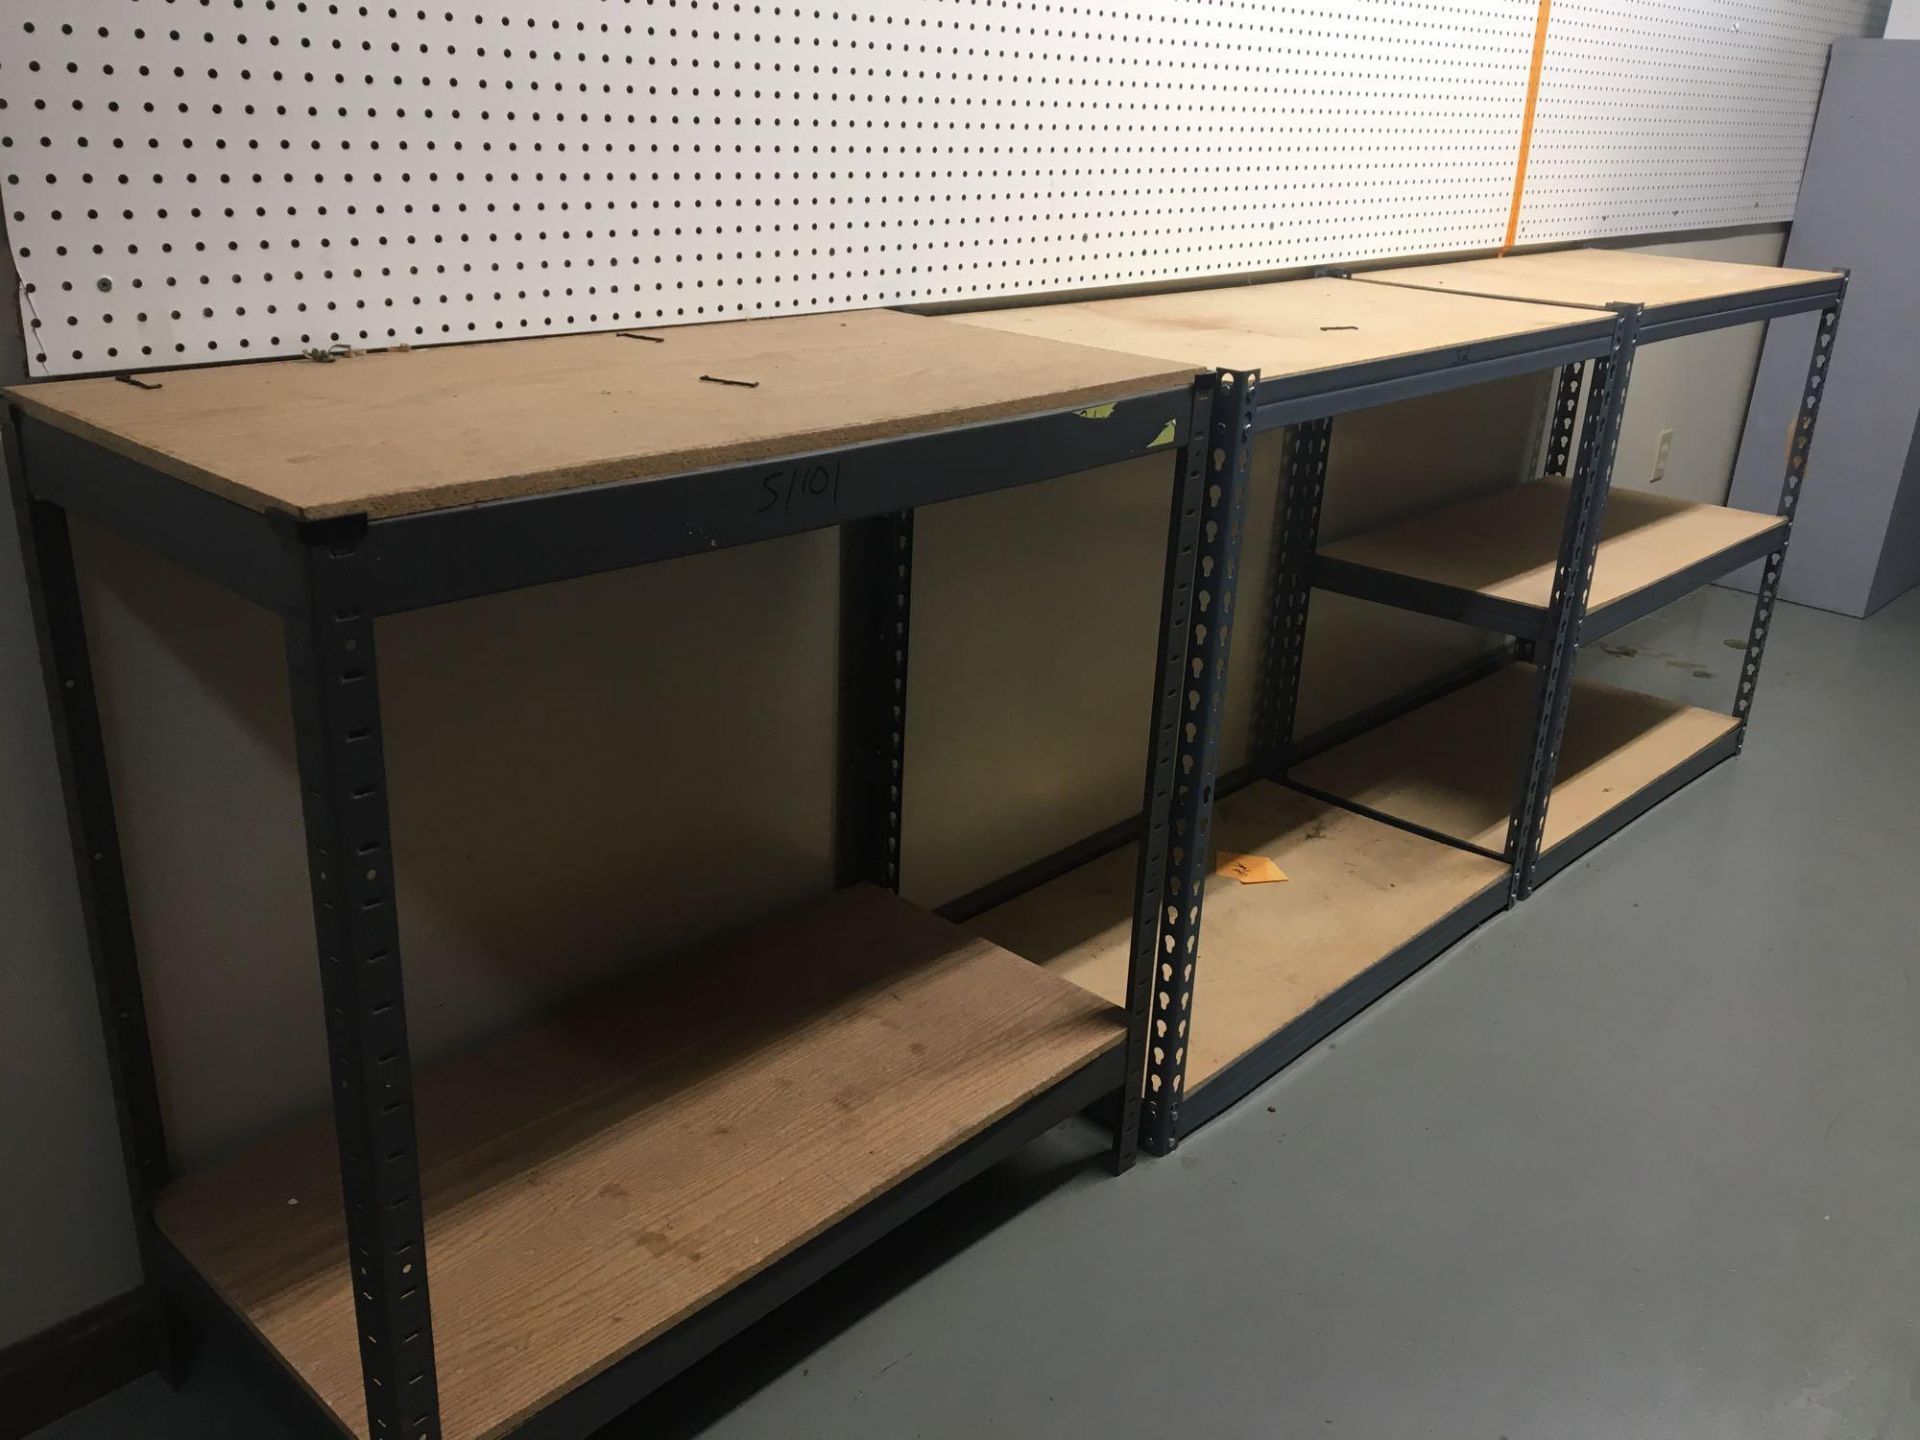 3 Counter Height Metal Shelving Units - Image 2 of 2